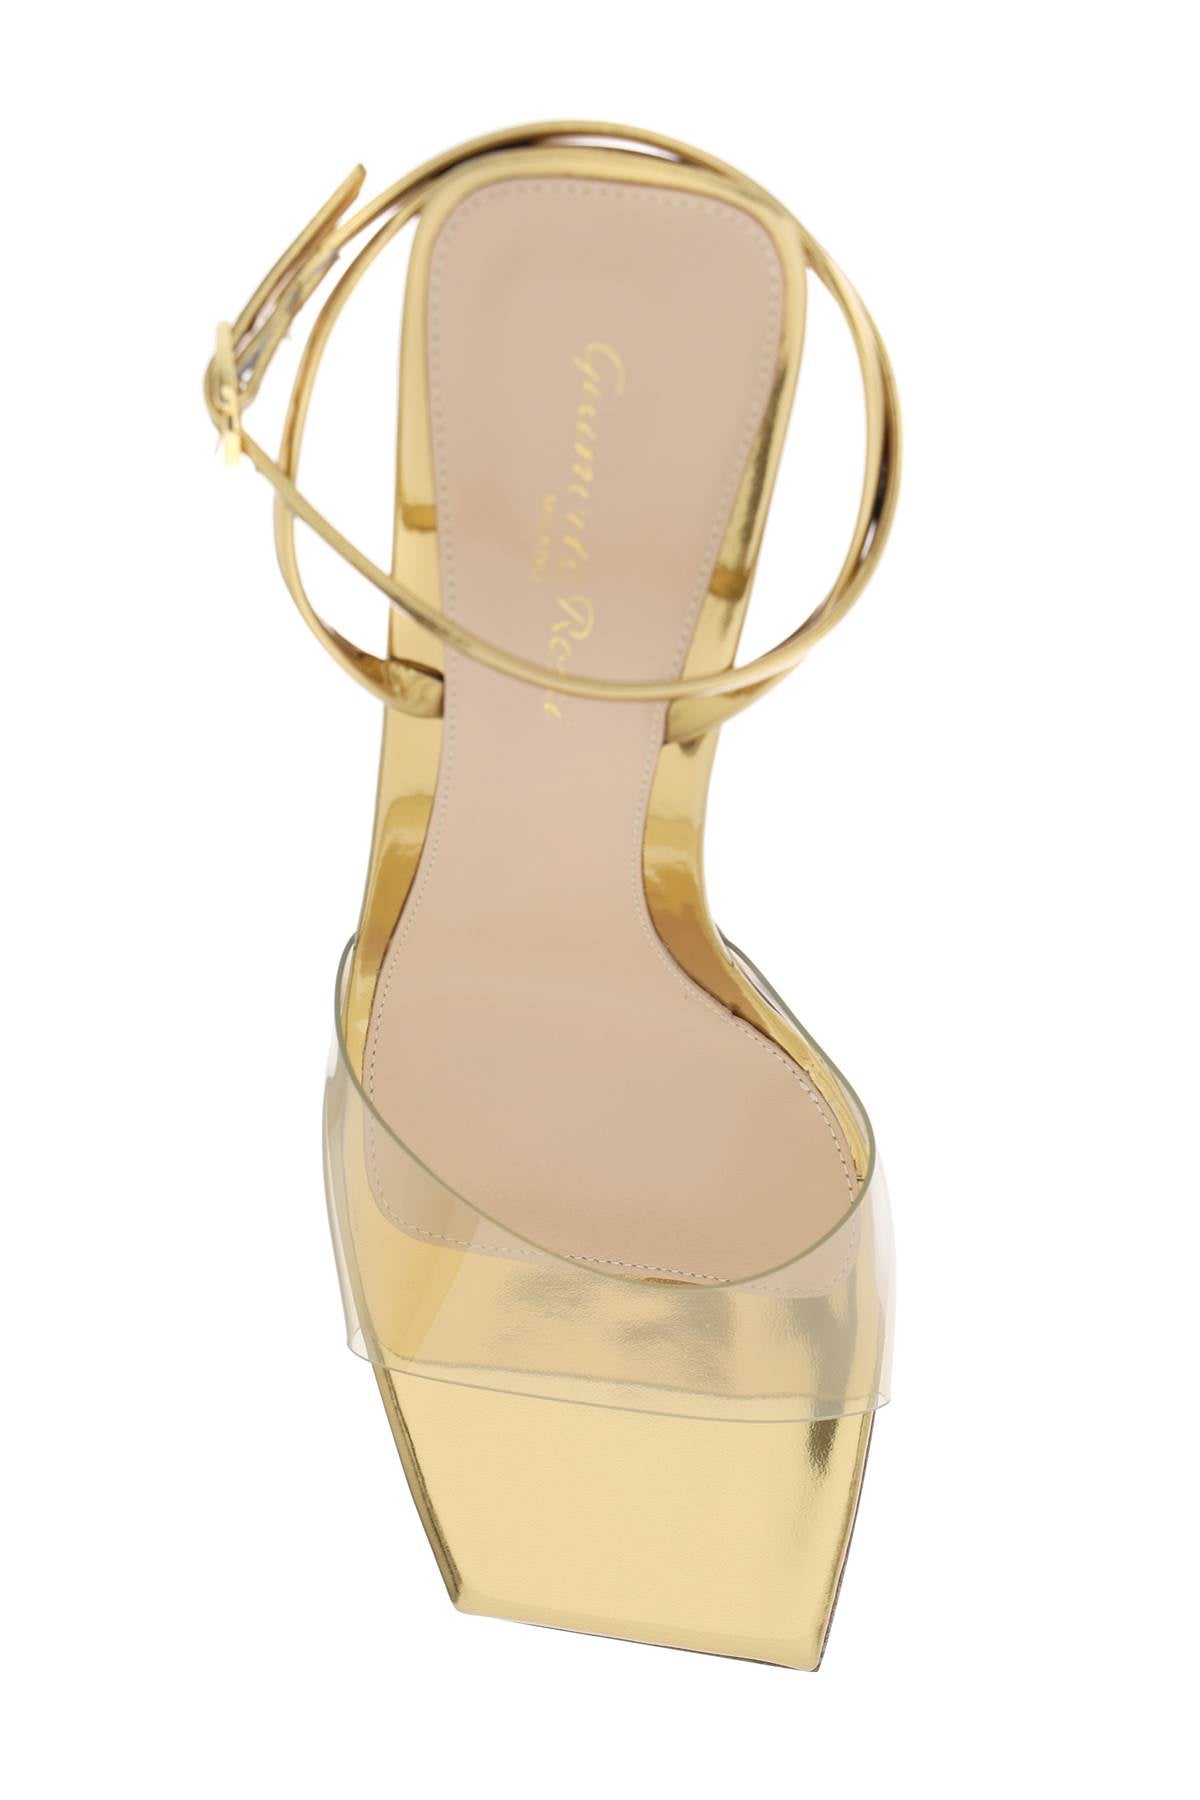 GIANVITO ROSSI Elegant Gold T-Strap Sandals for Women - Strut Your Style with Cosmic 85